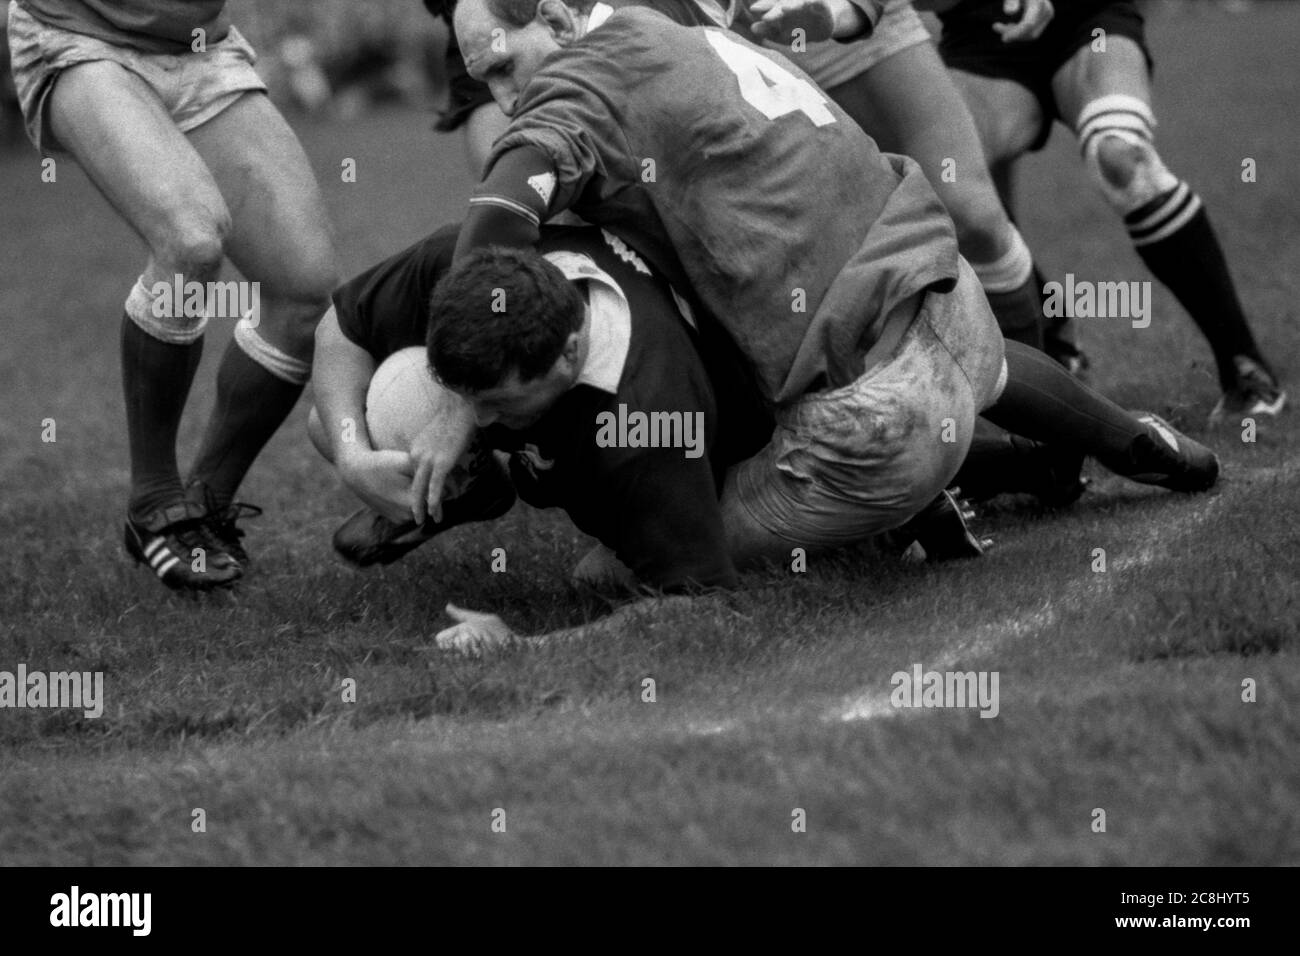 New Zealand All Blacks hooker Sean Fitzpatrick held up short by Llanelli RFC's Phil May as he attempts to score for the tourists at Stradey Park, Llanelli on 28 October 1989. Stock Photo